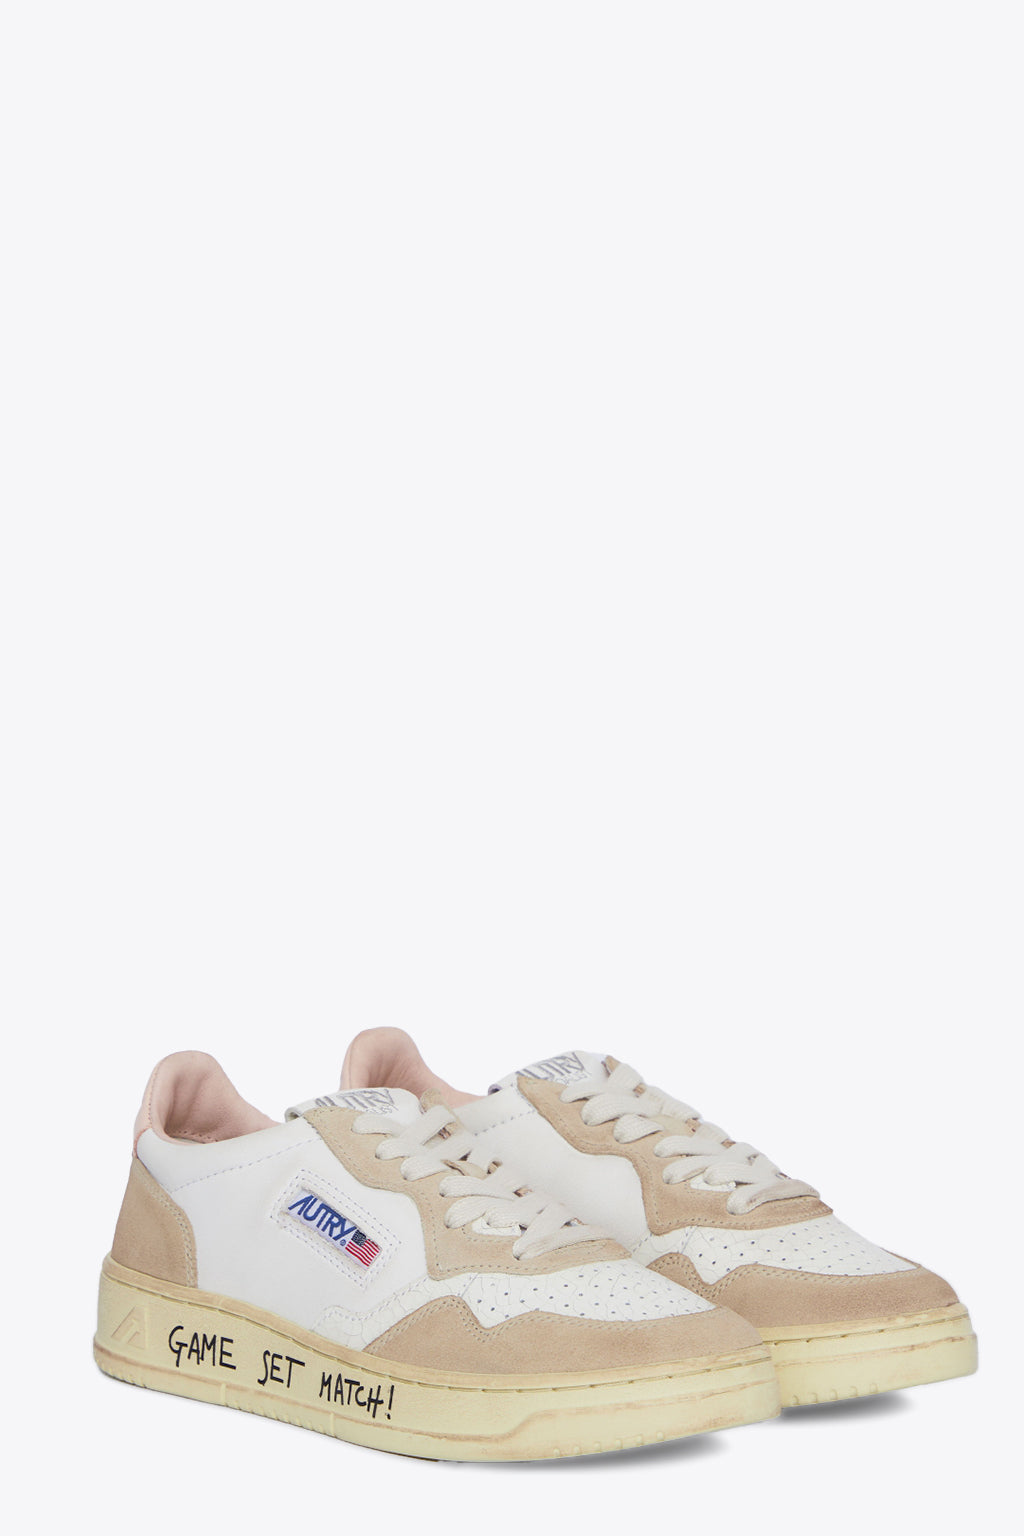 alt-image__White-leather-low-sneaker-with-slogan-print---Medalist